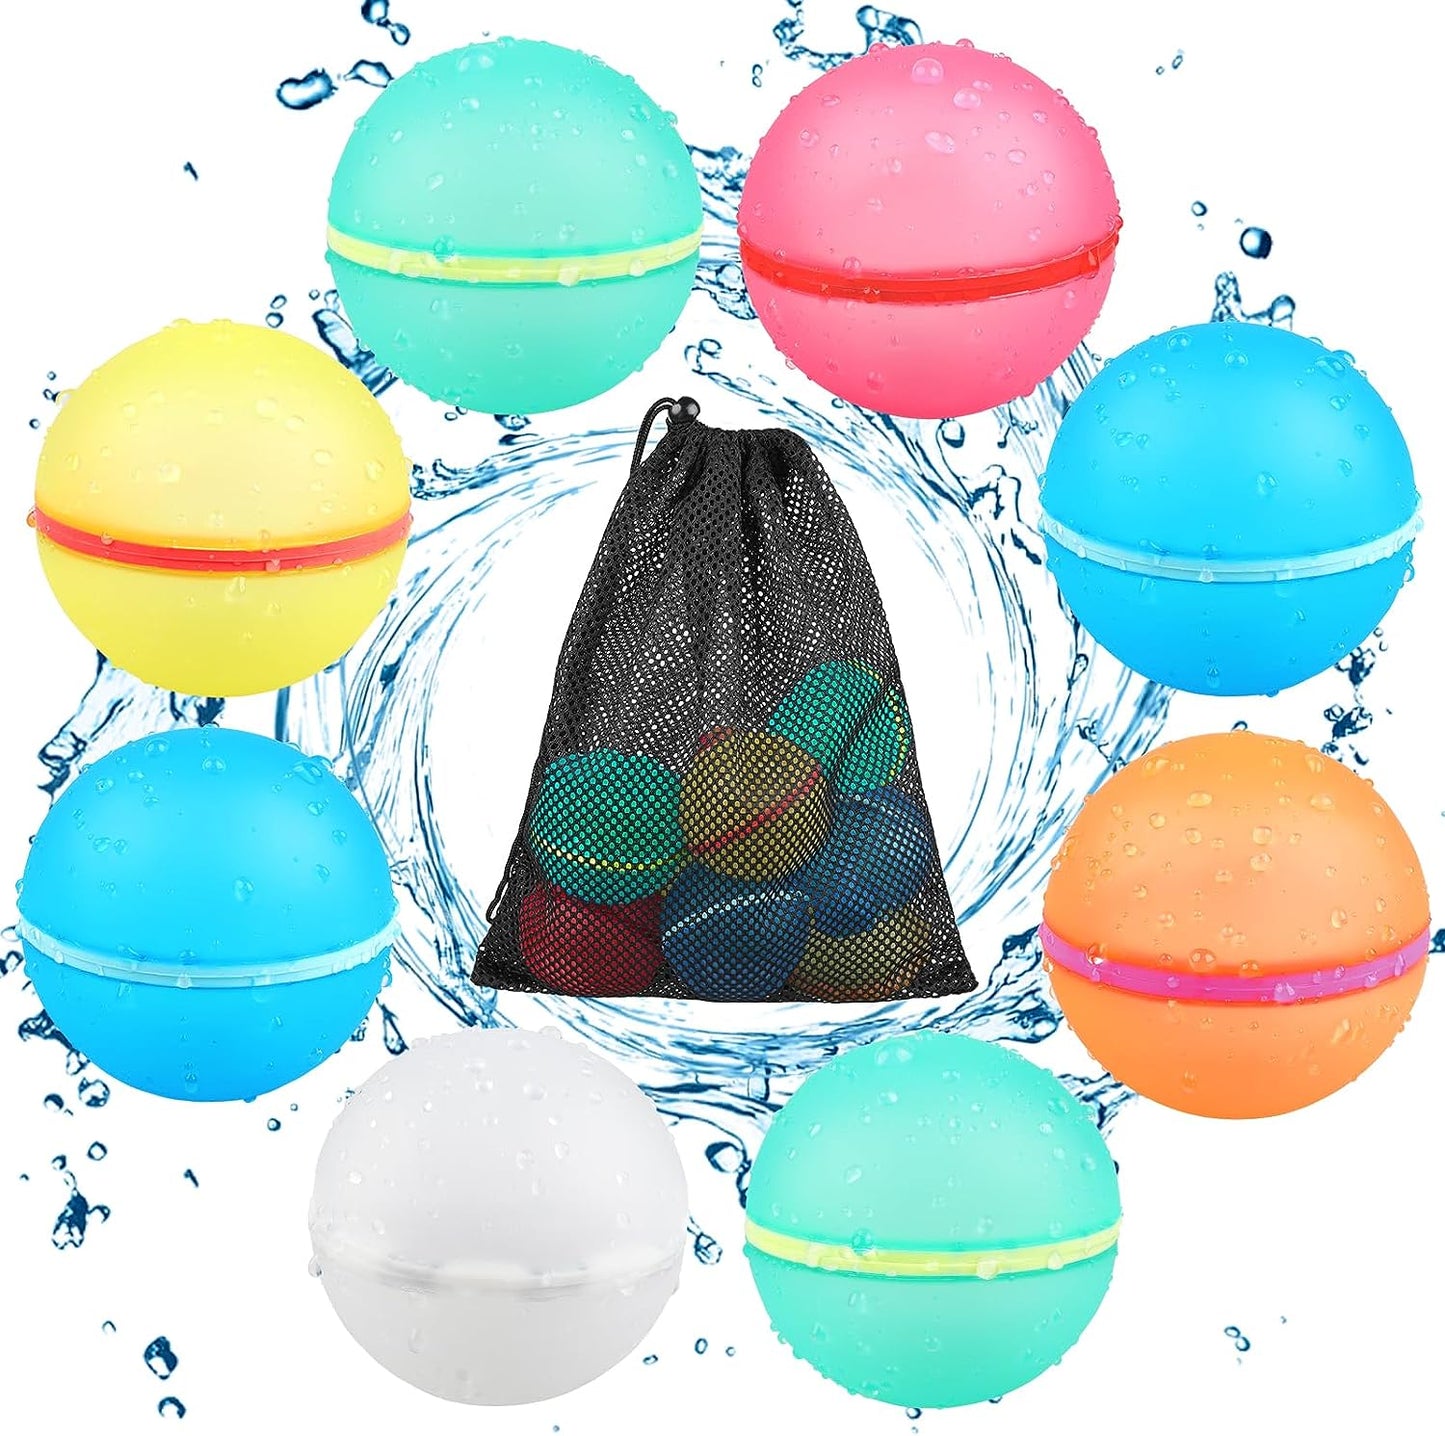 Reusable Water Balloons Refillable Water Bomb, Soft Silicone Water Balls with Mesh Bag, Quick Fill & Self-Sealing Water Balloons for Water Fight Games, Outdoor Water Toys for Kids Adults,4Pcs